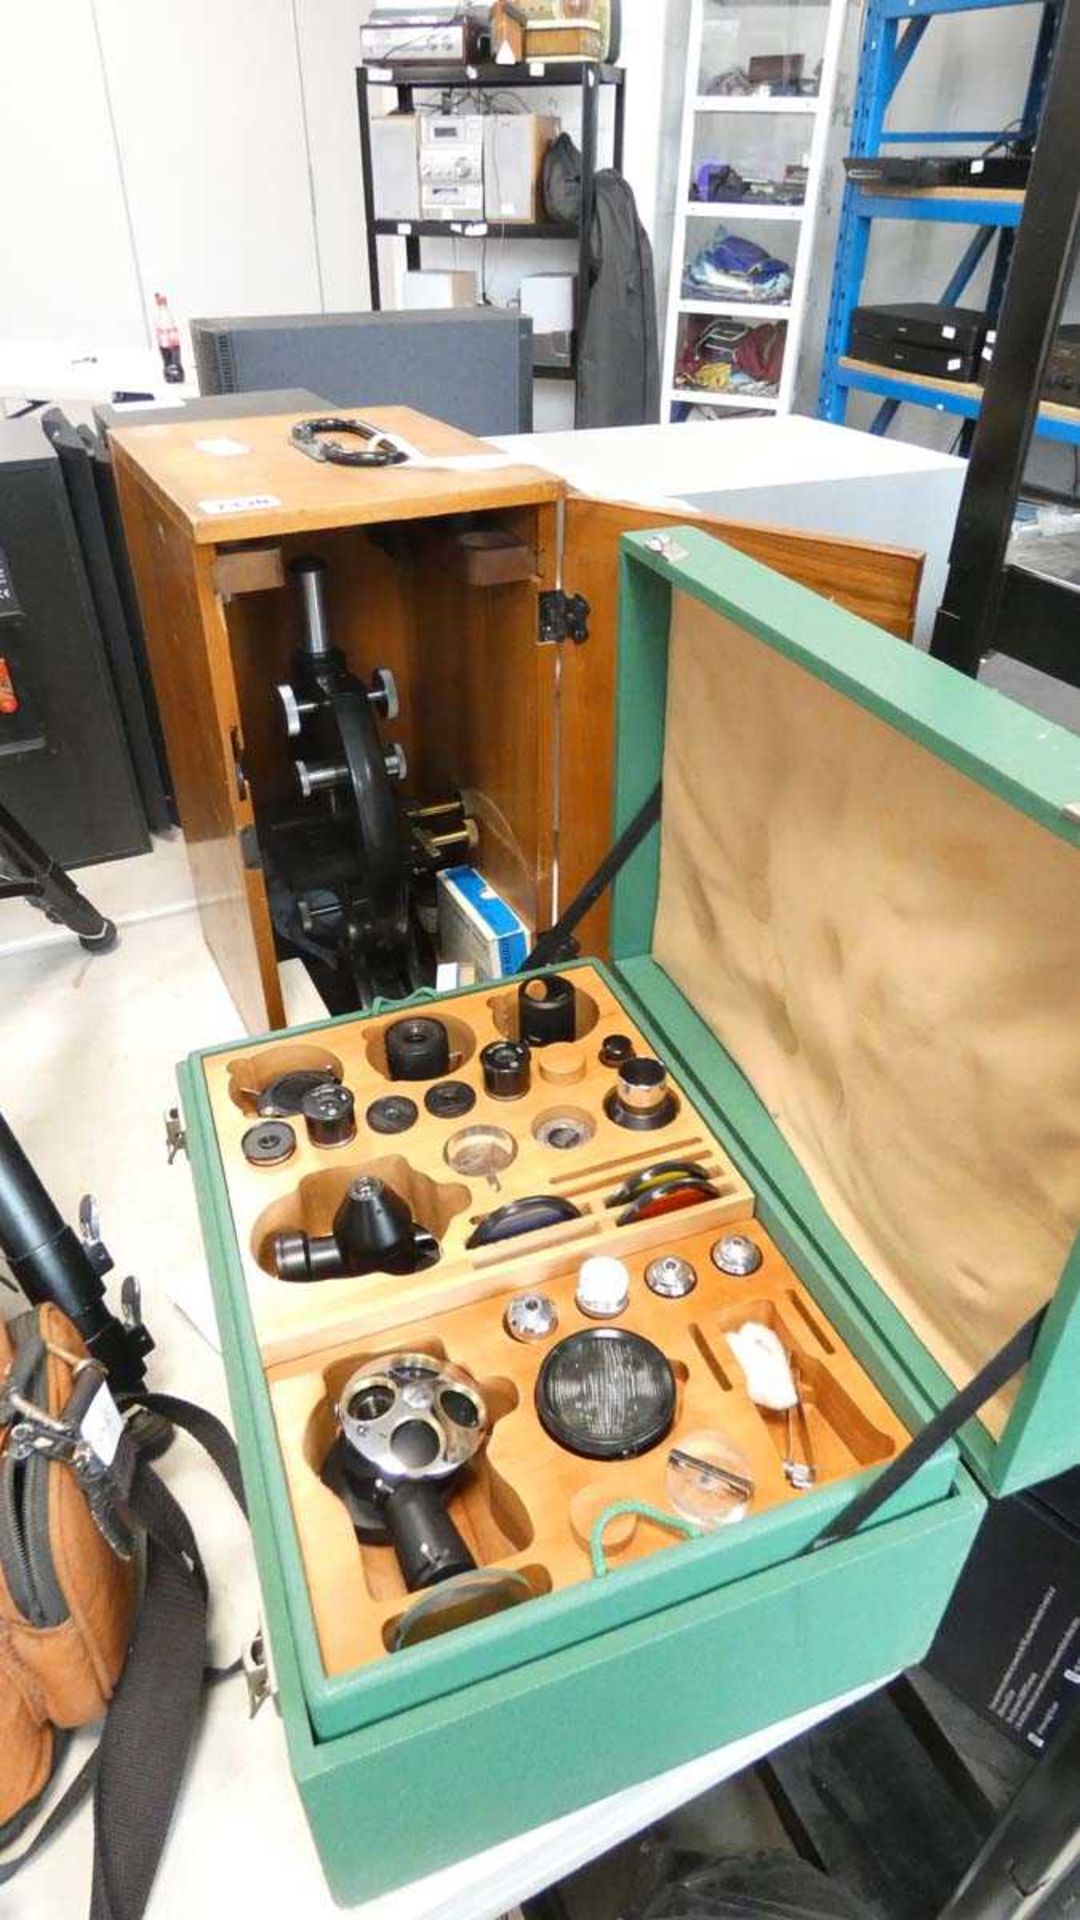 Student microscope with wooden case and a further green case with various filters and other